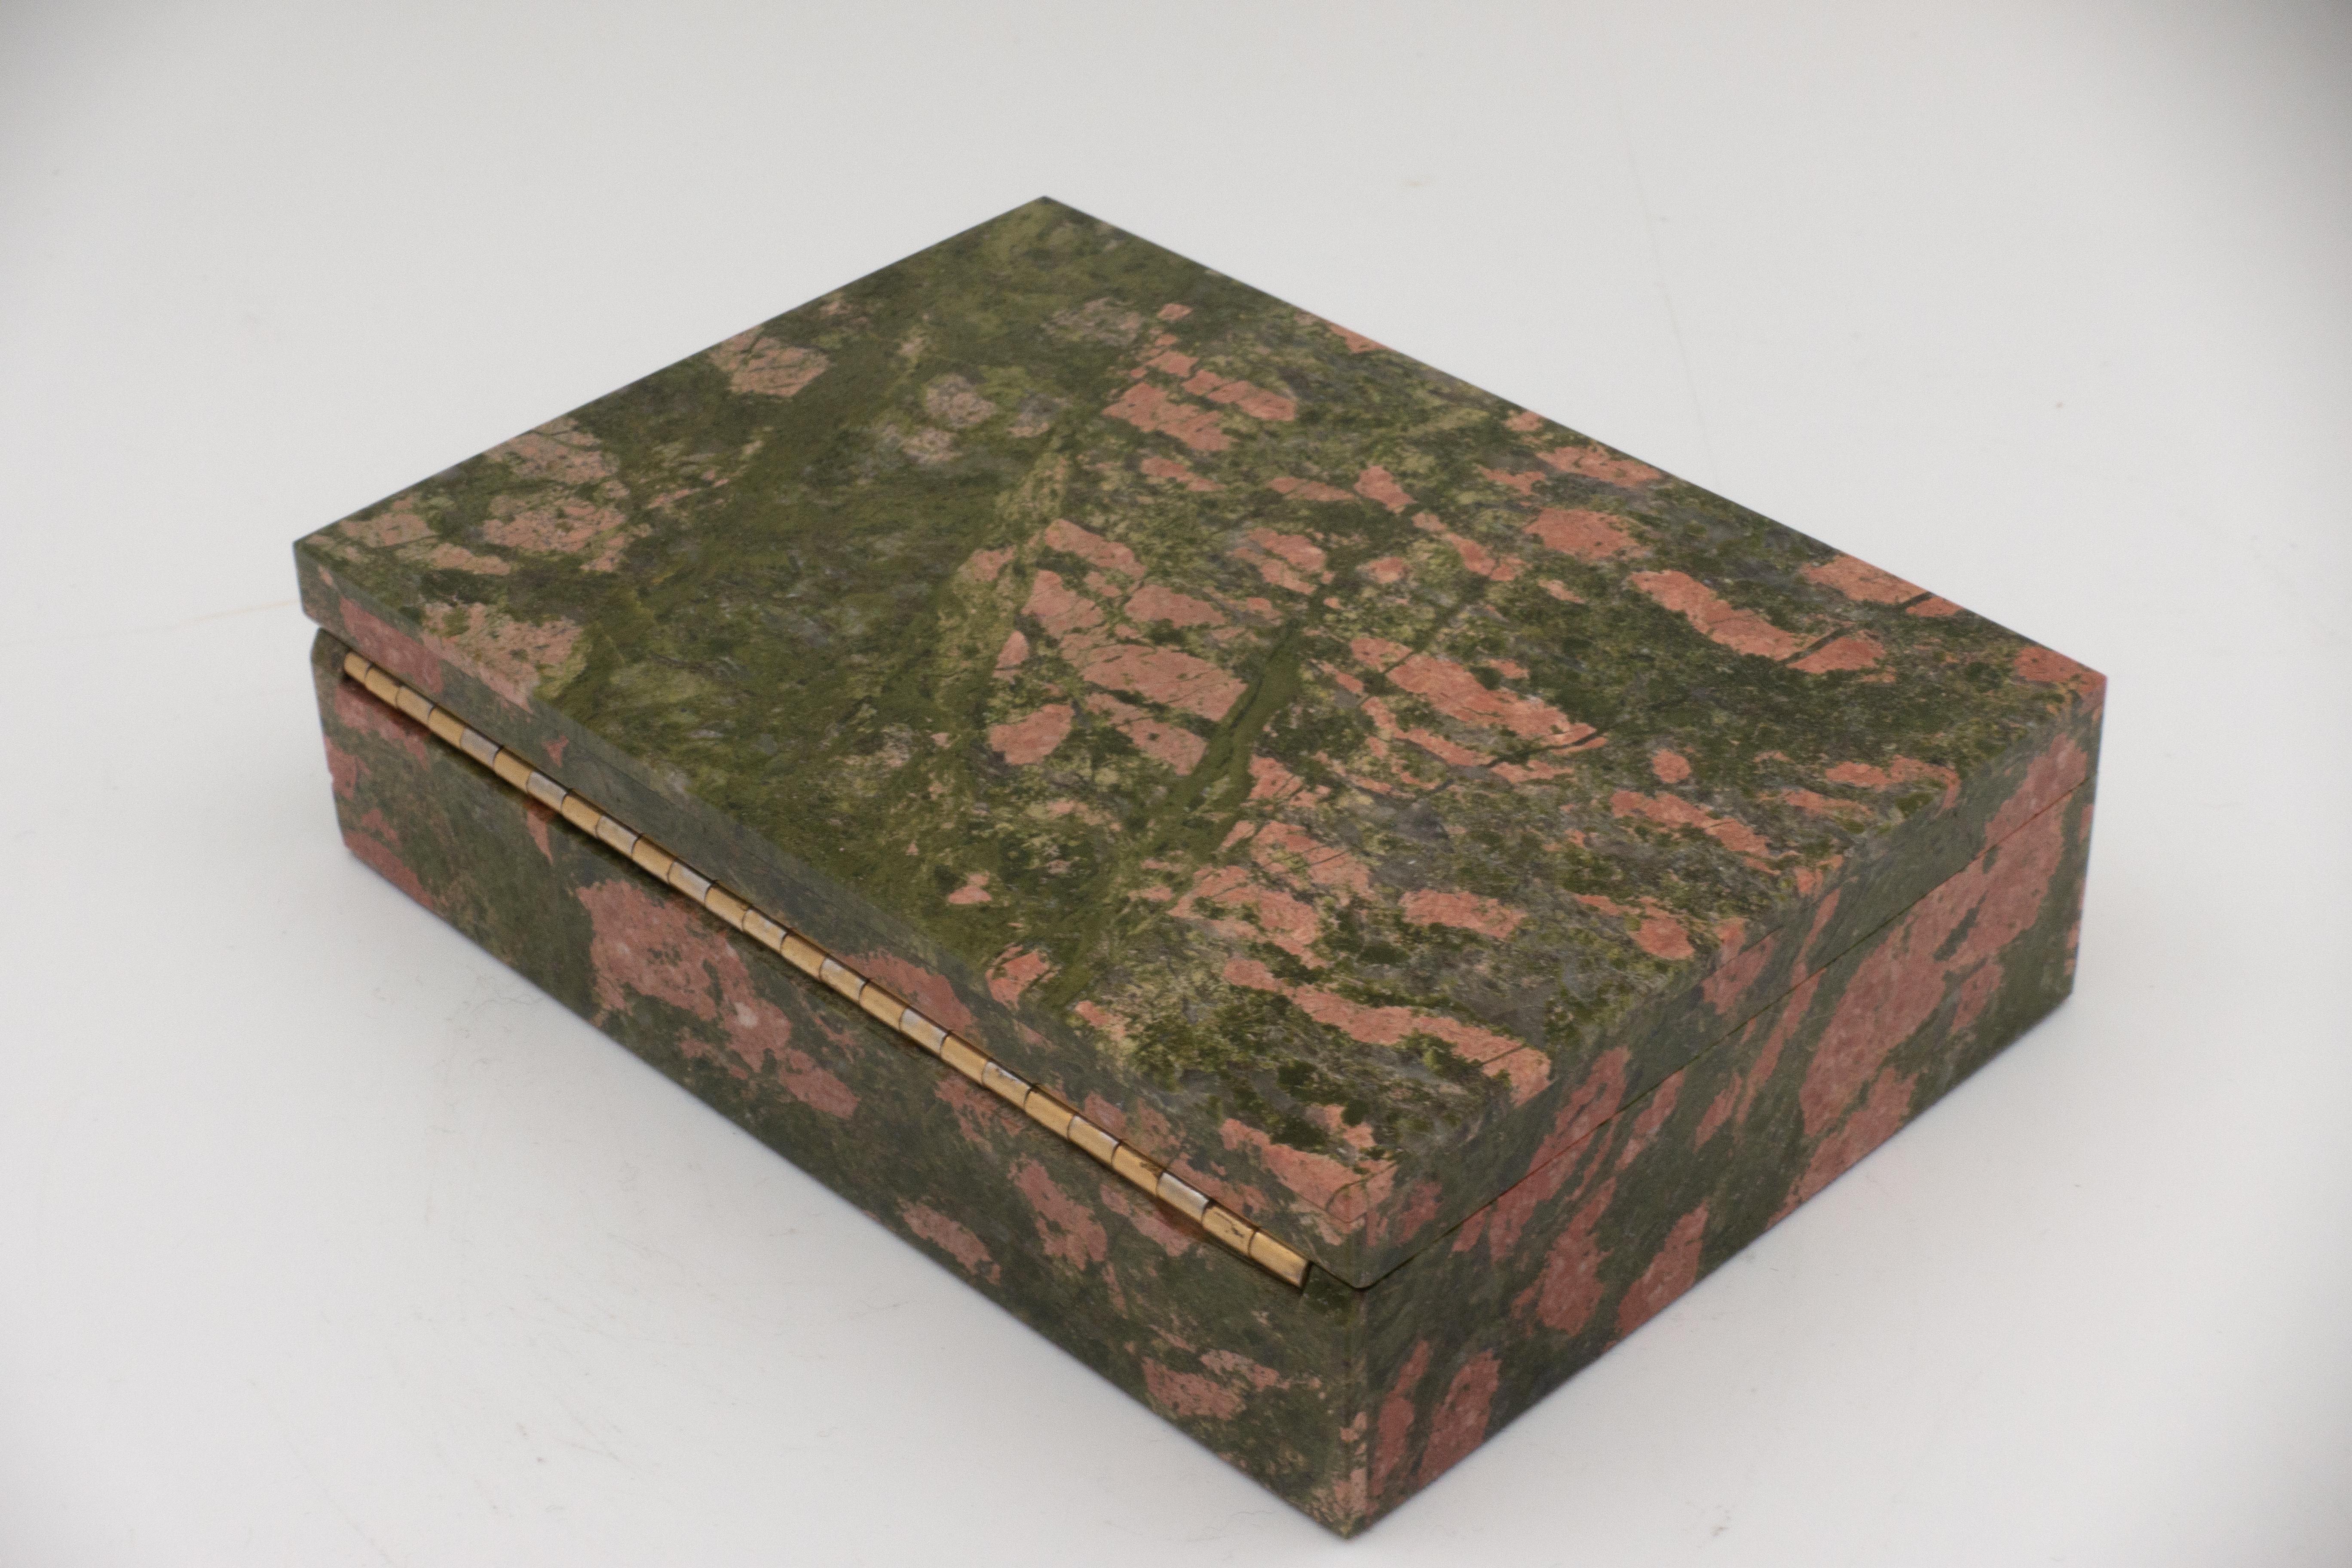 Unakite box with hinged lid. Unakite is an altered granite composed of pink orthoclase feldspar, green epidote, and generally colorless quartz. It was first discovered in the United States in the Unakas Mountains of North Carolina from which it gets